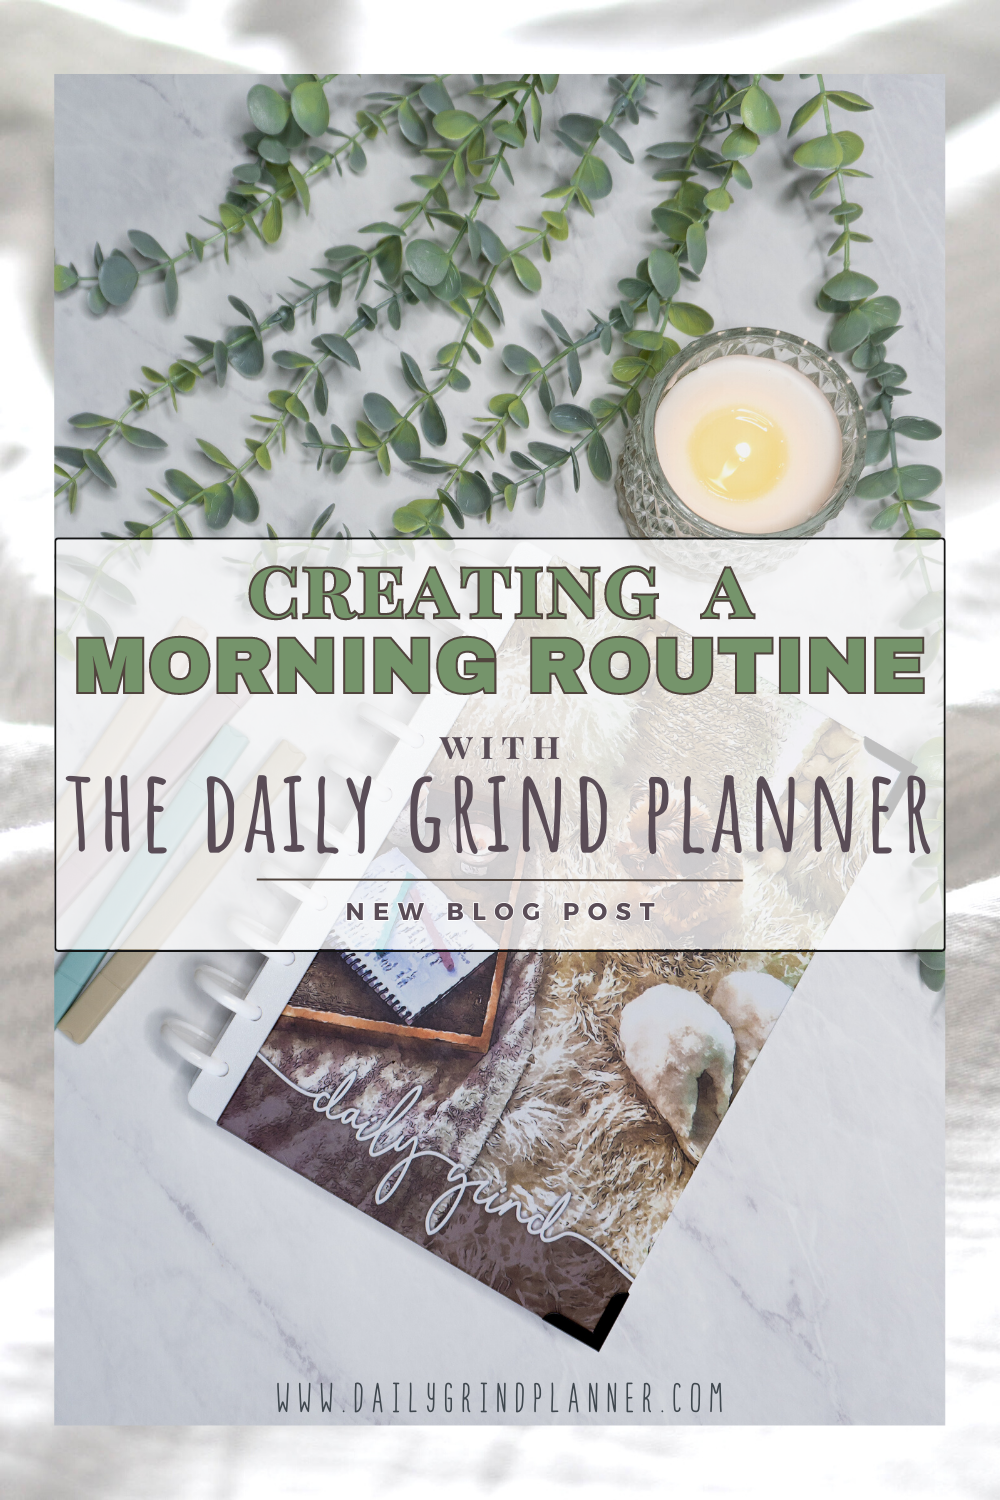 Creating a Morning Routine with The Daily Grind Planner